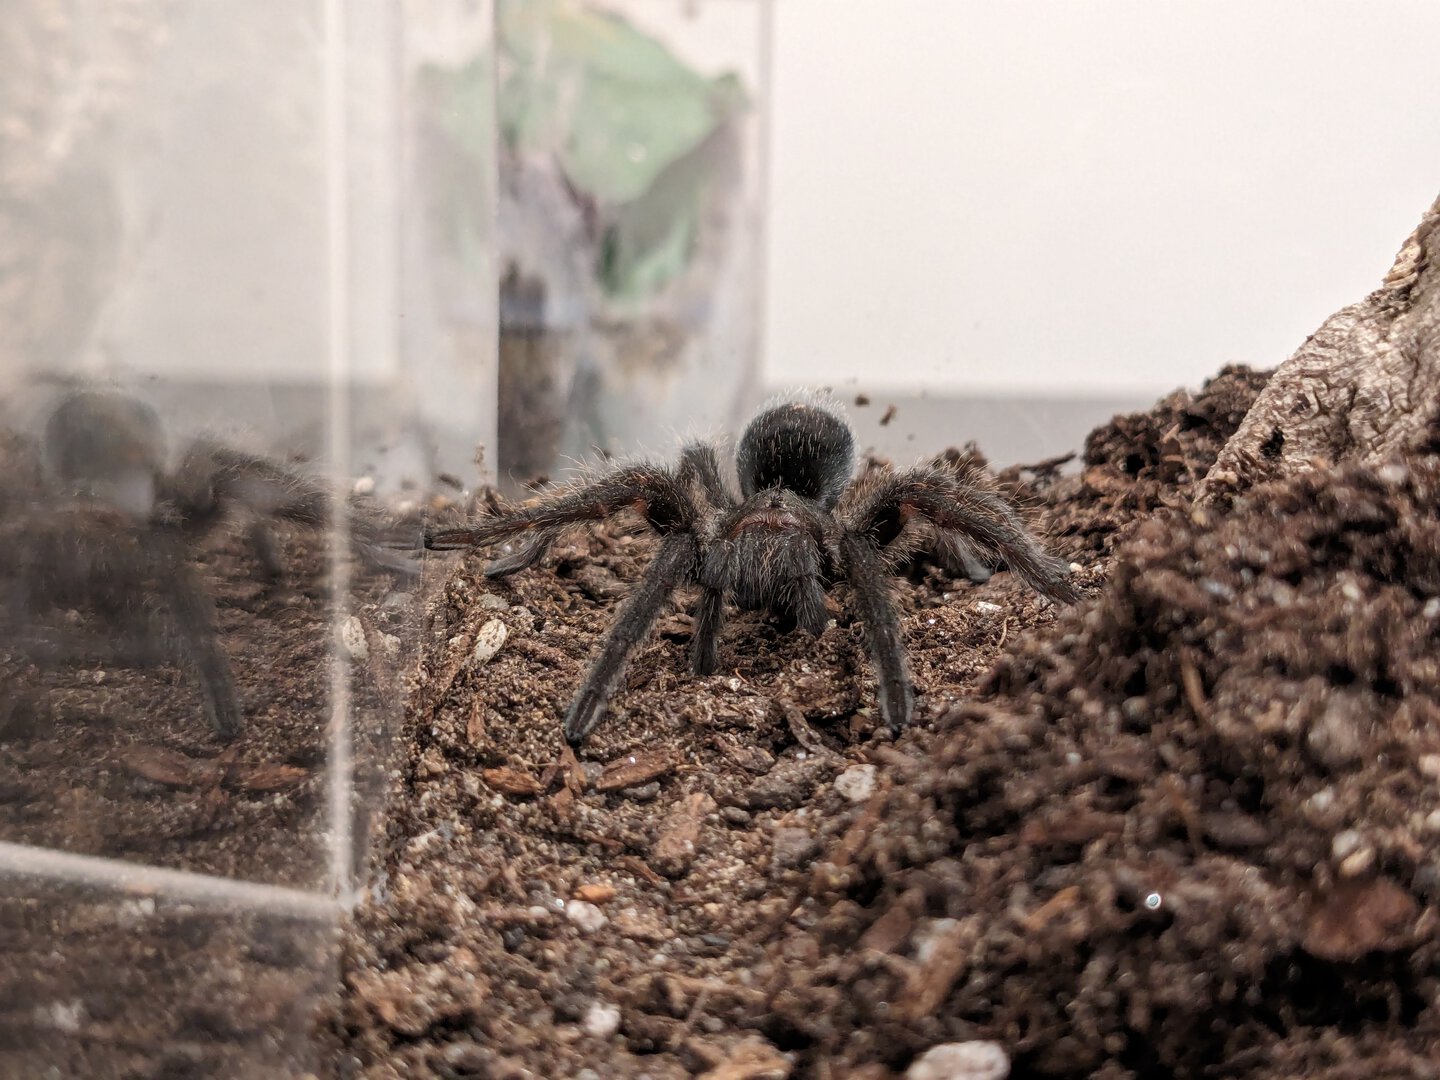 G. pulchra "Lava" models her new clothes